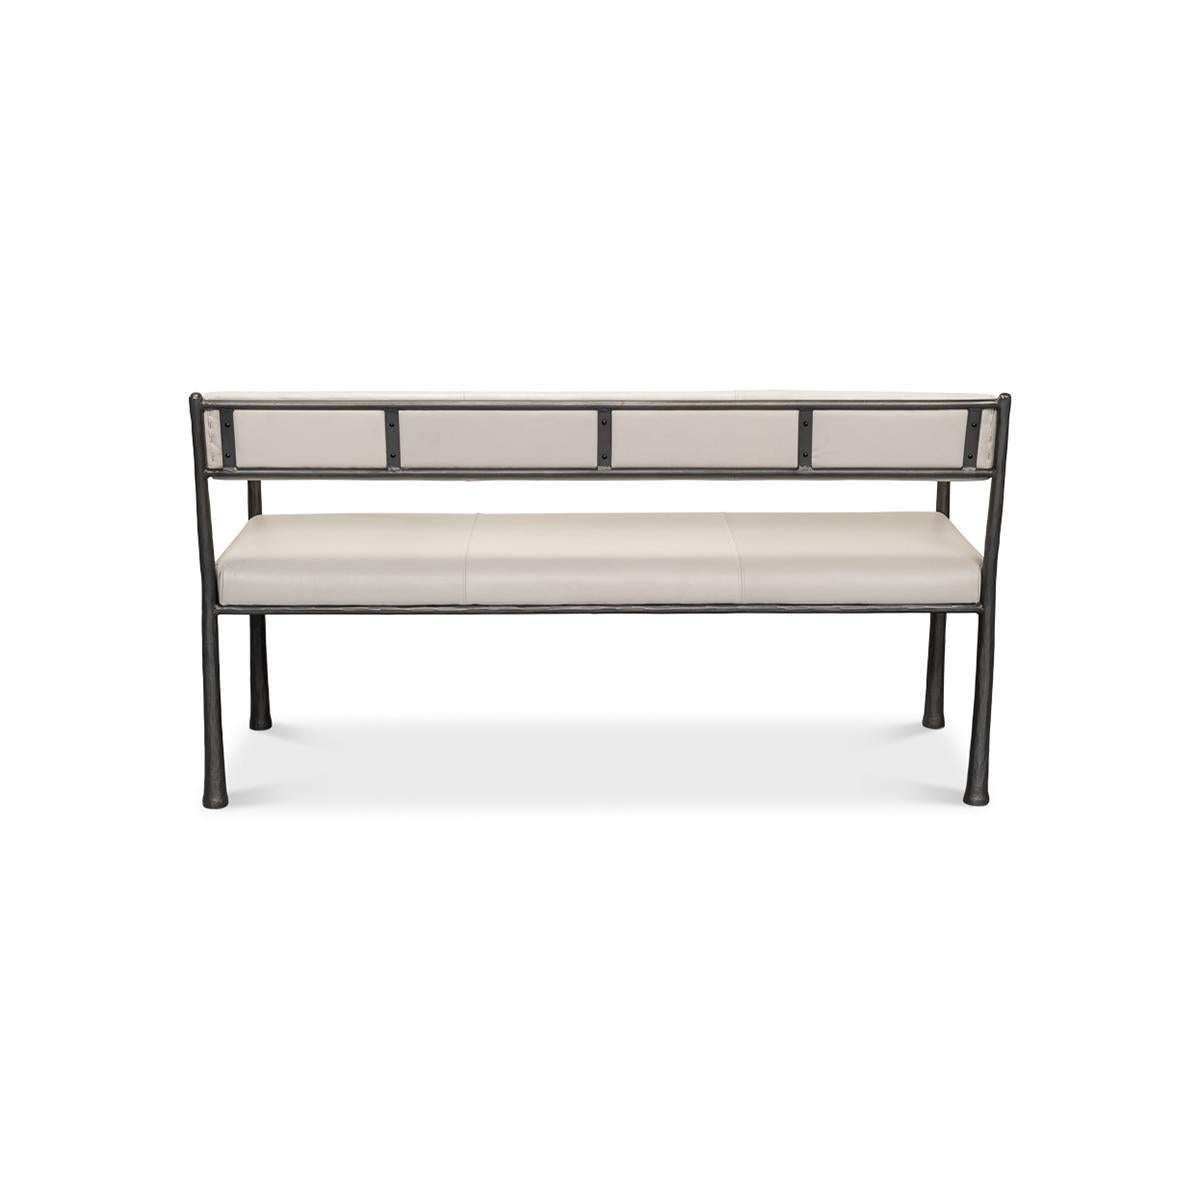 Contemporary Industrial Modern Bench For Sale